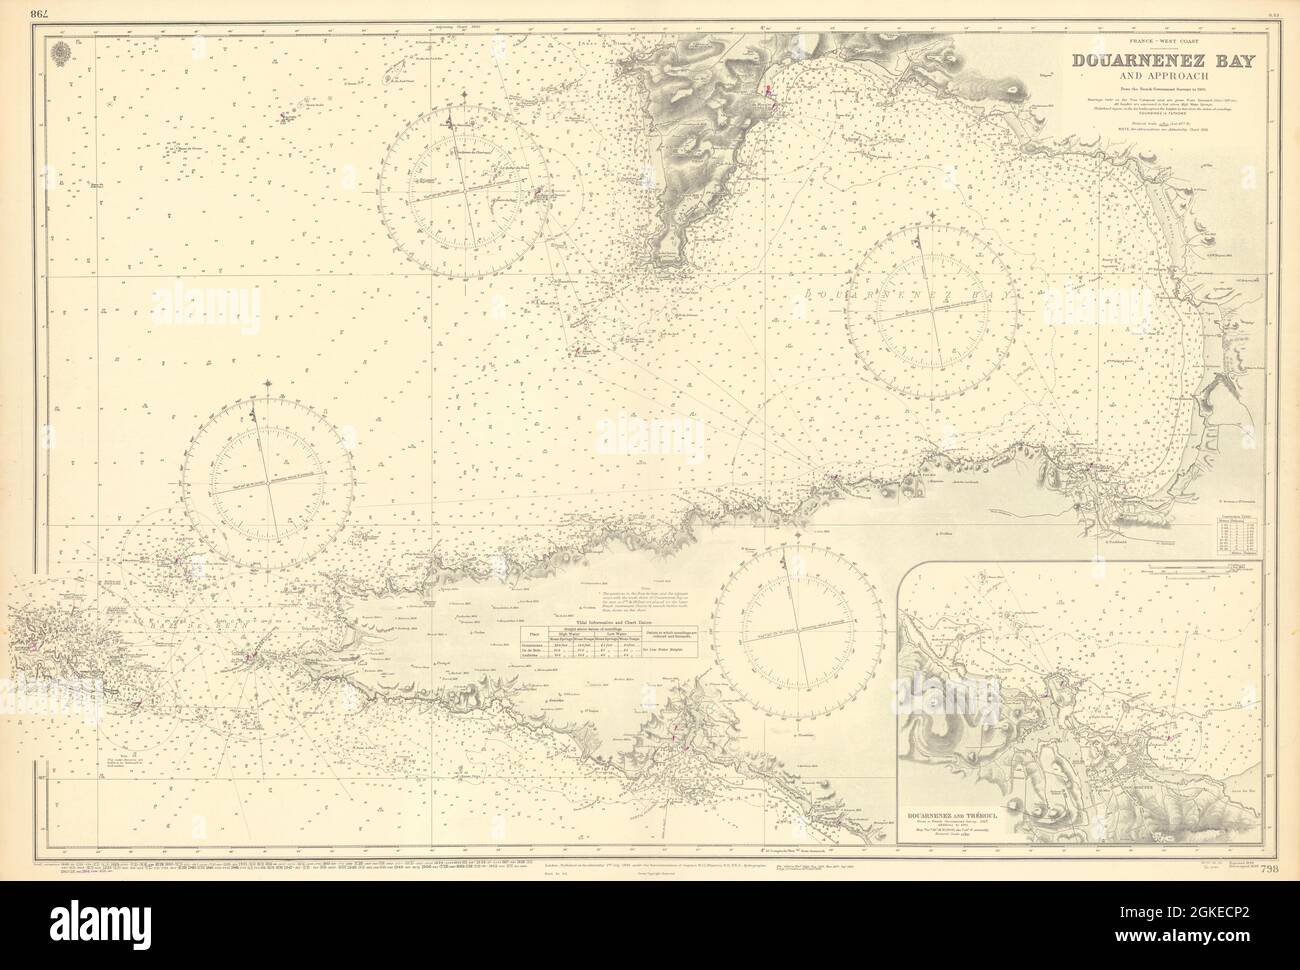 Douarnenez Bay & Approaches. Finistère. MAPPA DELL'ADMIRALTY Sea chart 1894 (1955) Foto Stock